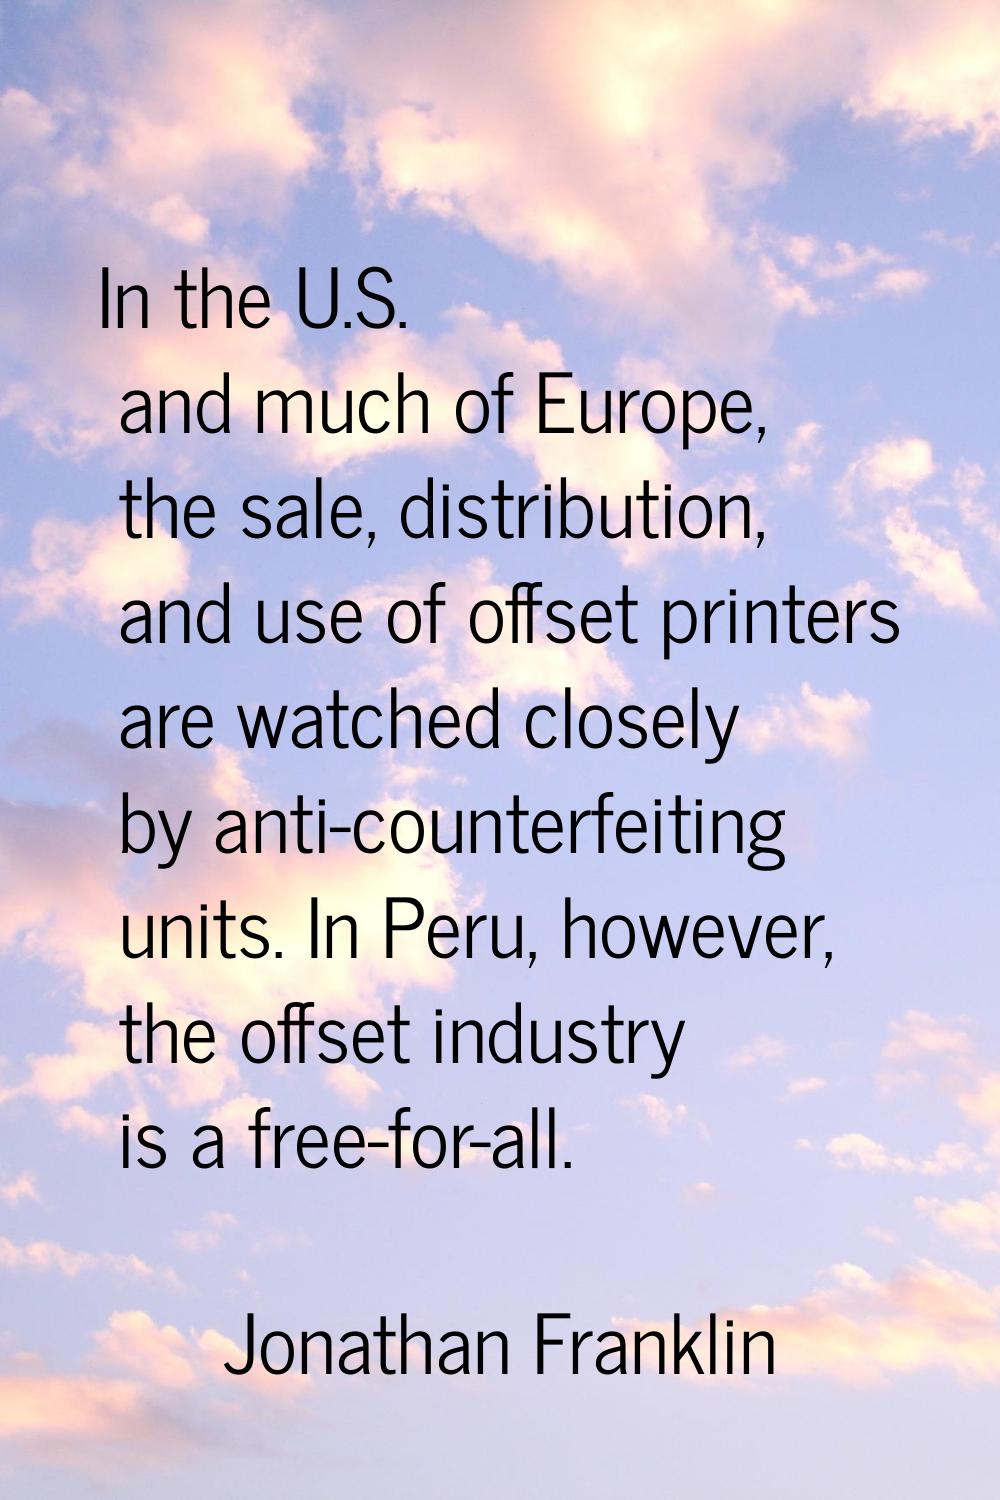 In the U.S. and much of Europe, the sale, distribution, and use of offset printers are watched clos